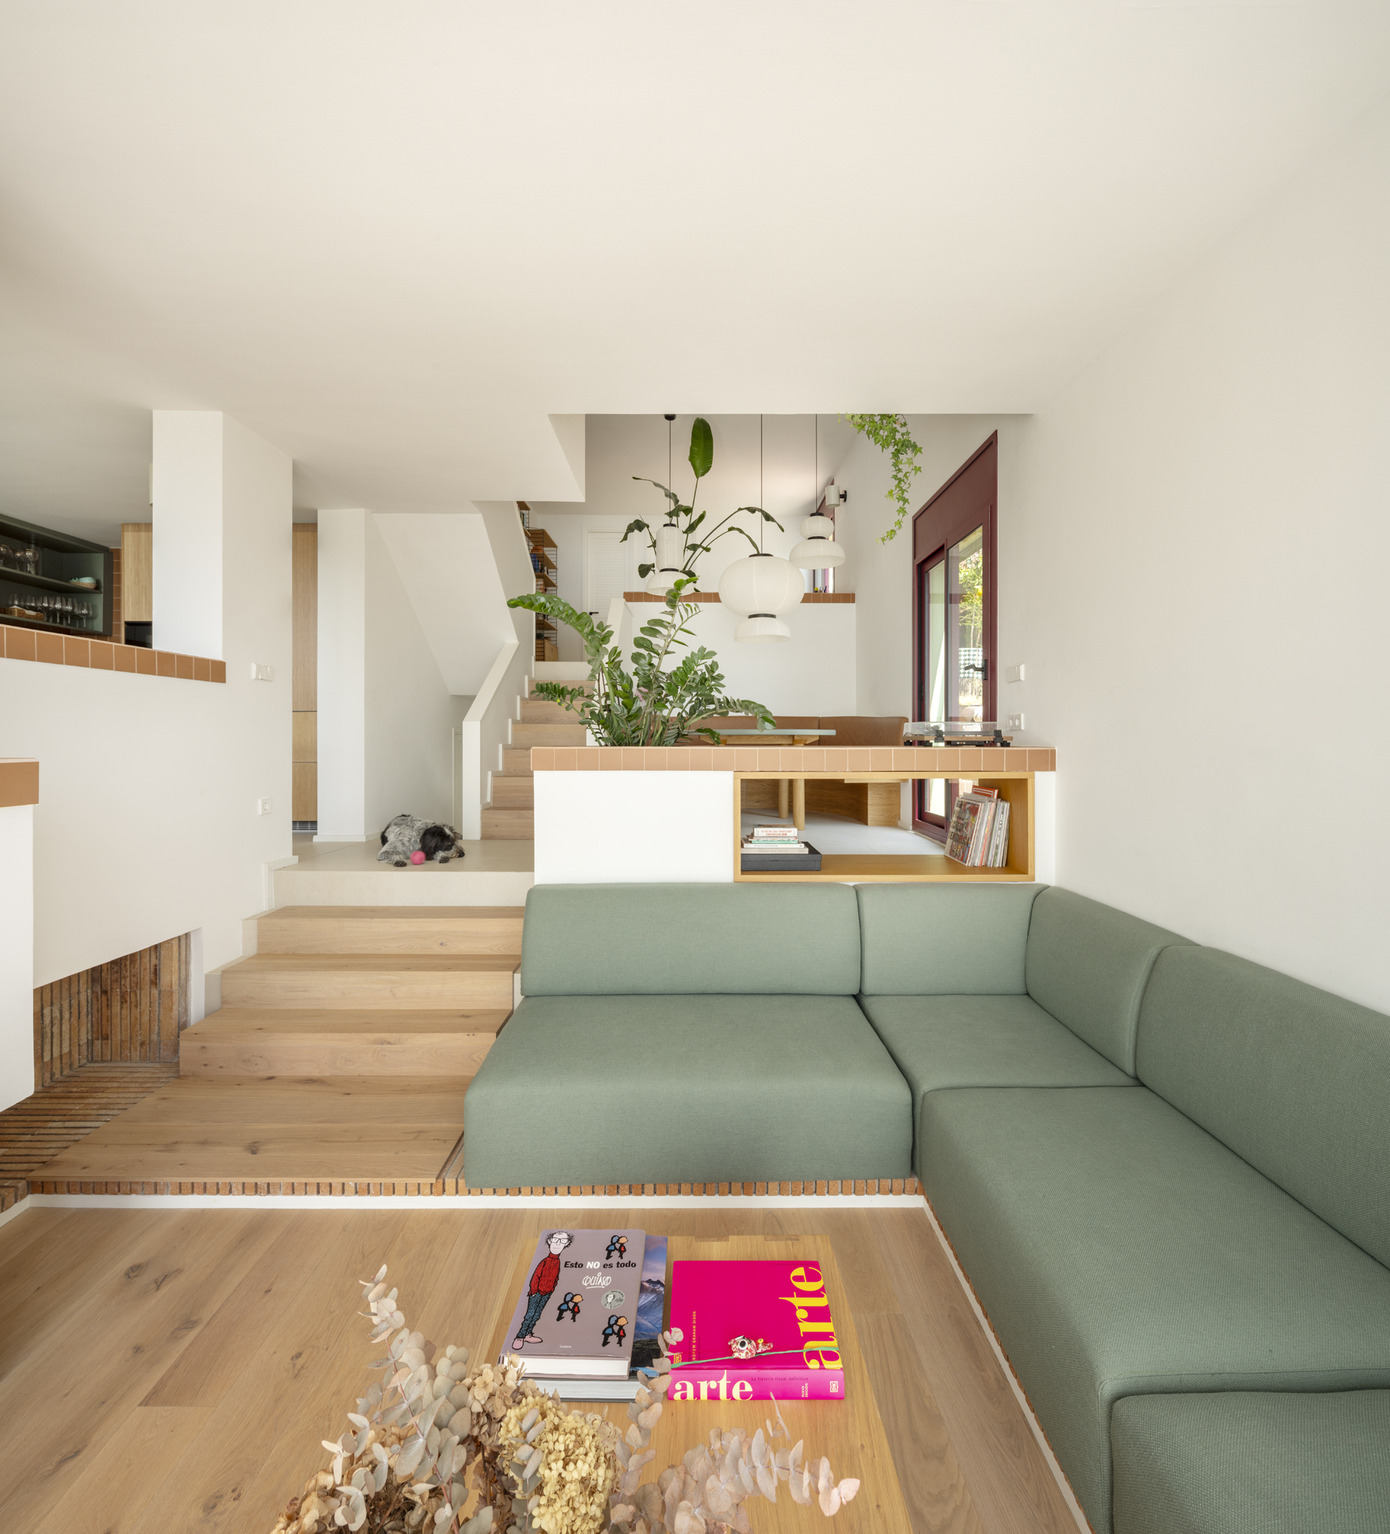 August Project: Barcelona’s Triplex Reimagined by Nook Architects